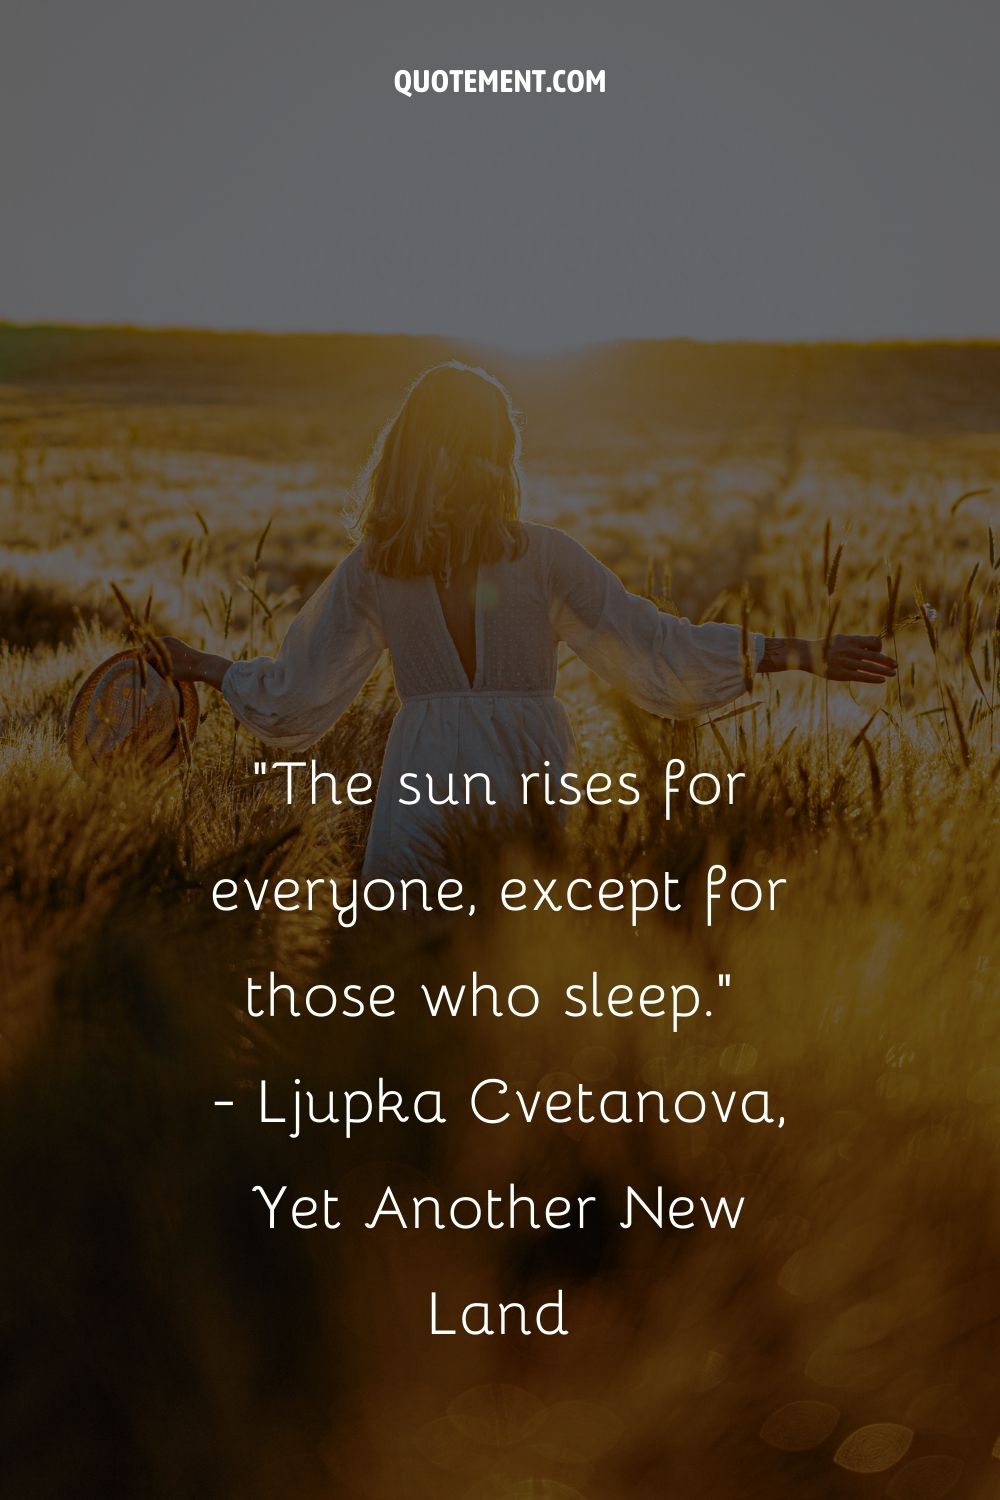 The sun rises for everyone, except for those who sleep.